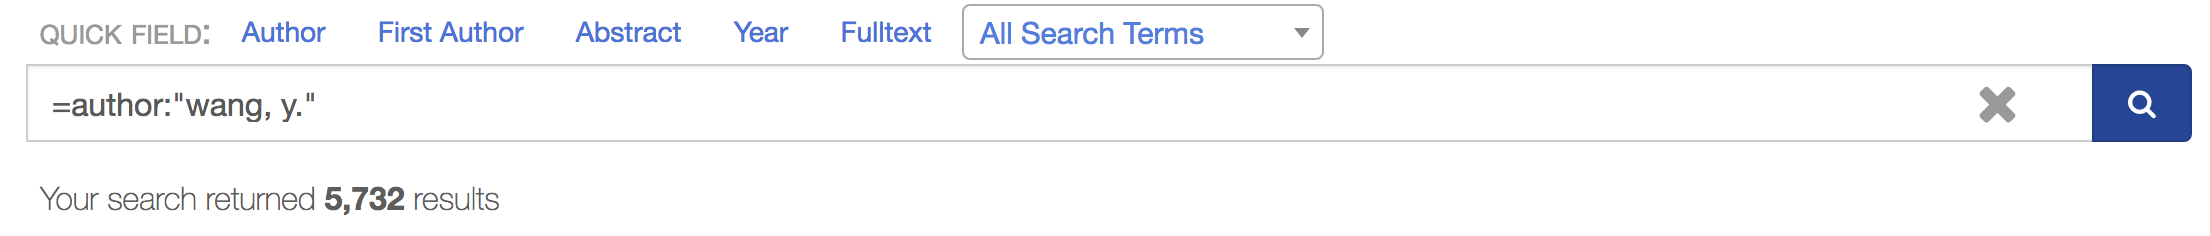 Exact
   name matching query with full family name and given name
   initial. 5732 total search results.